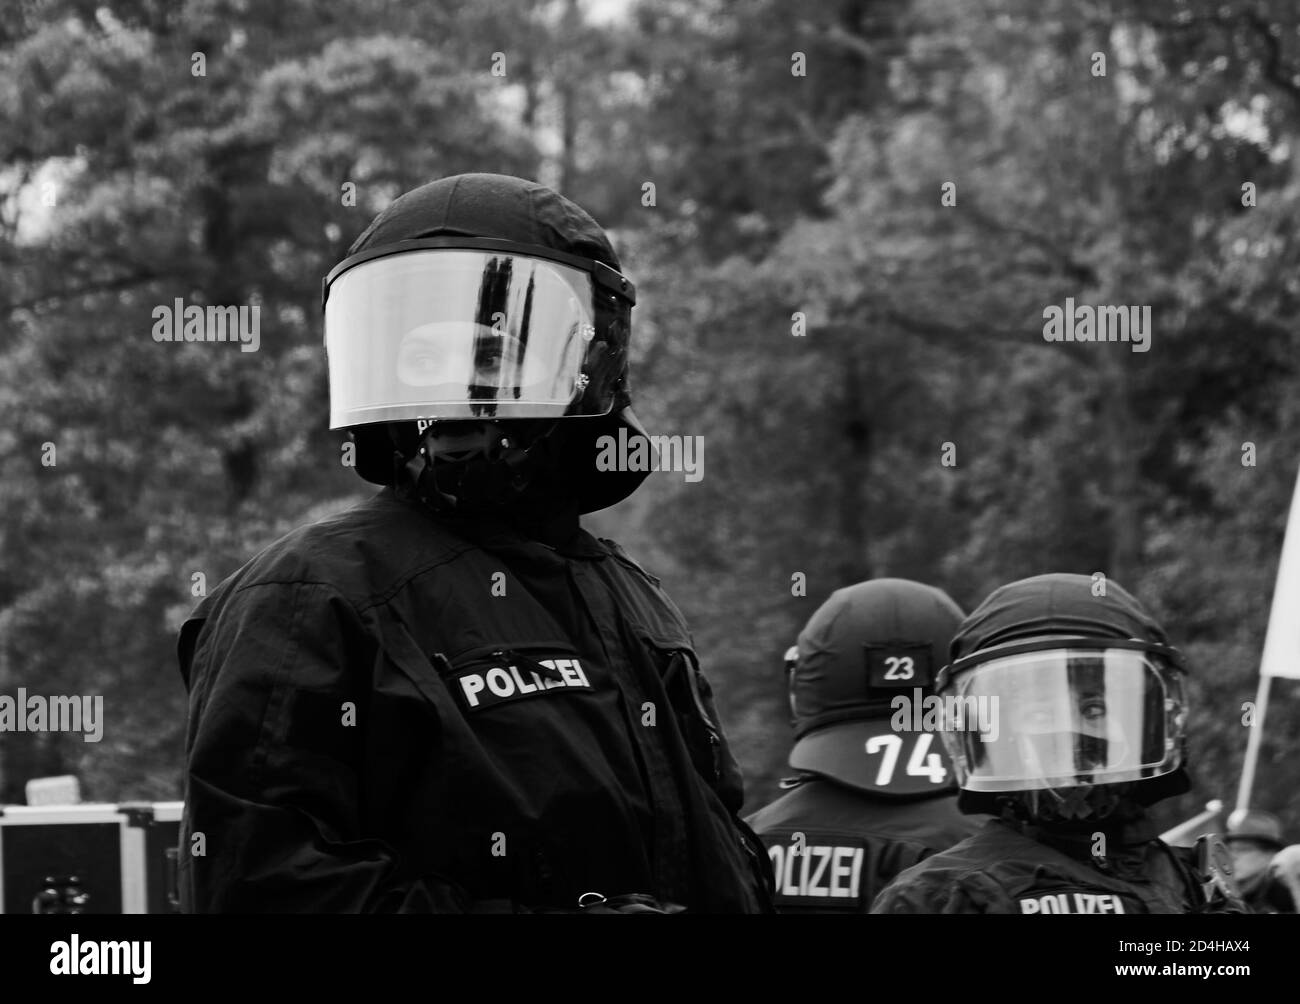 Eschede, Germany, September 26., 2020: Young German policemen look through their helmet visors in black uniforms, black and white Stock Photo